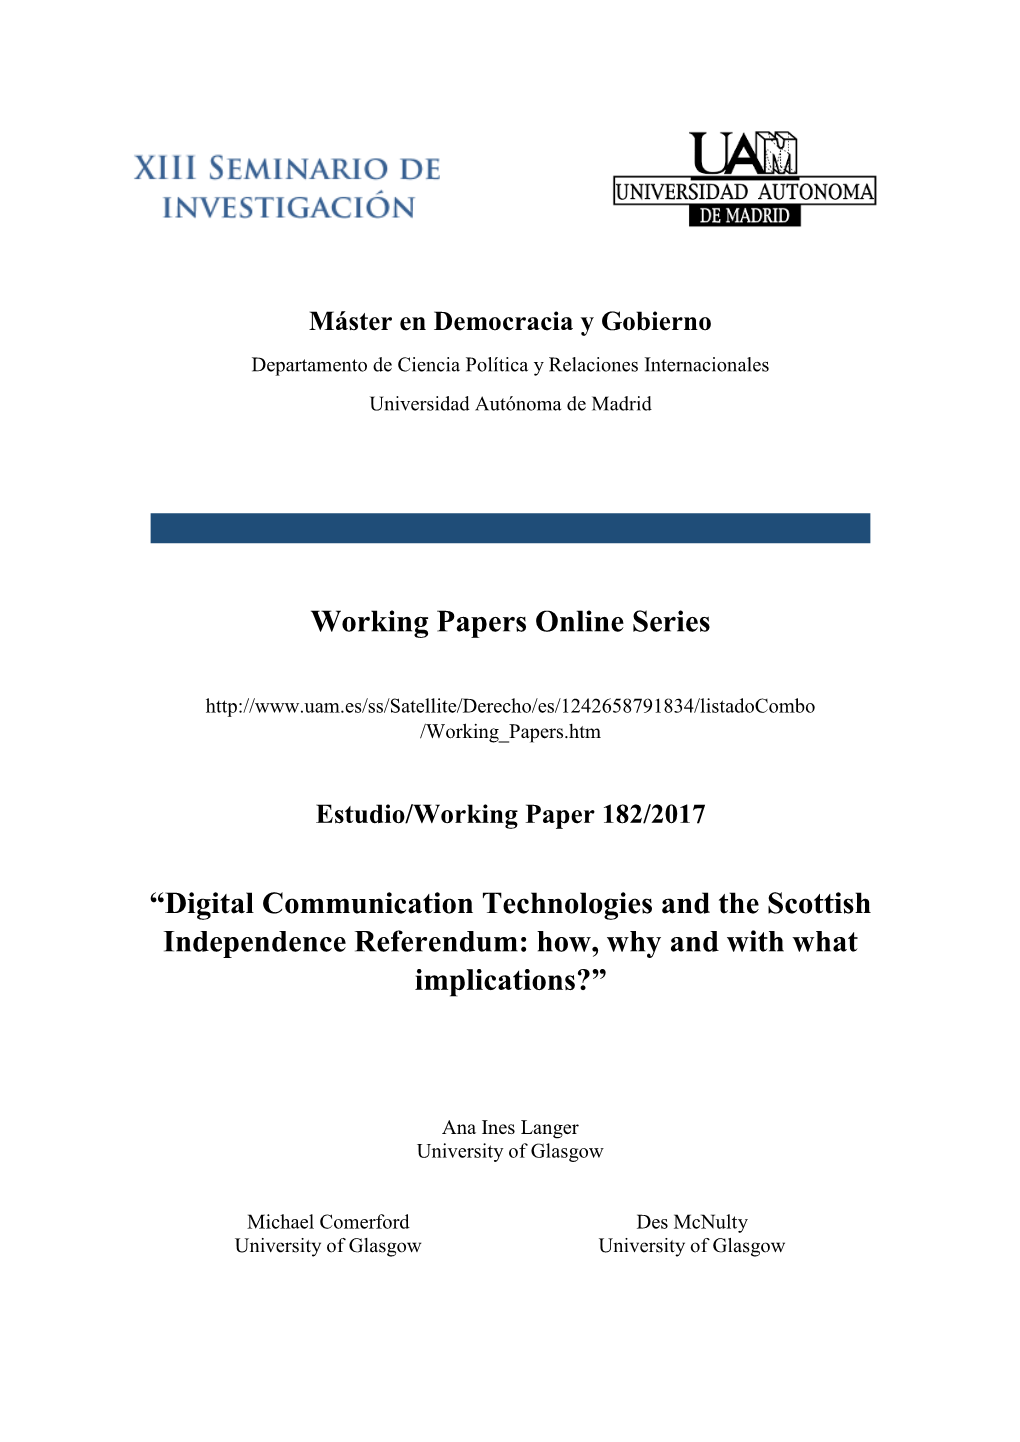 Working Papers Online Series “Digital Communication Technologies And